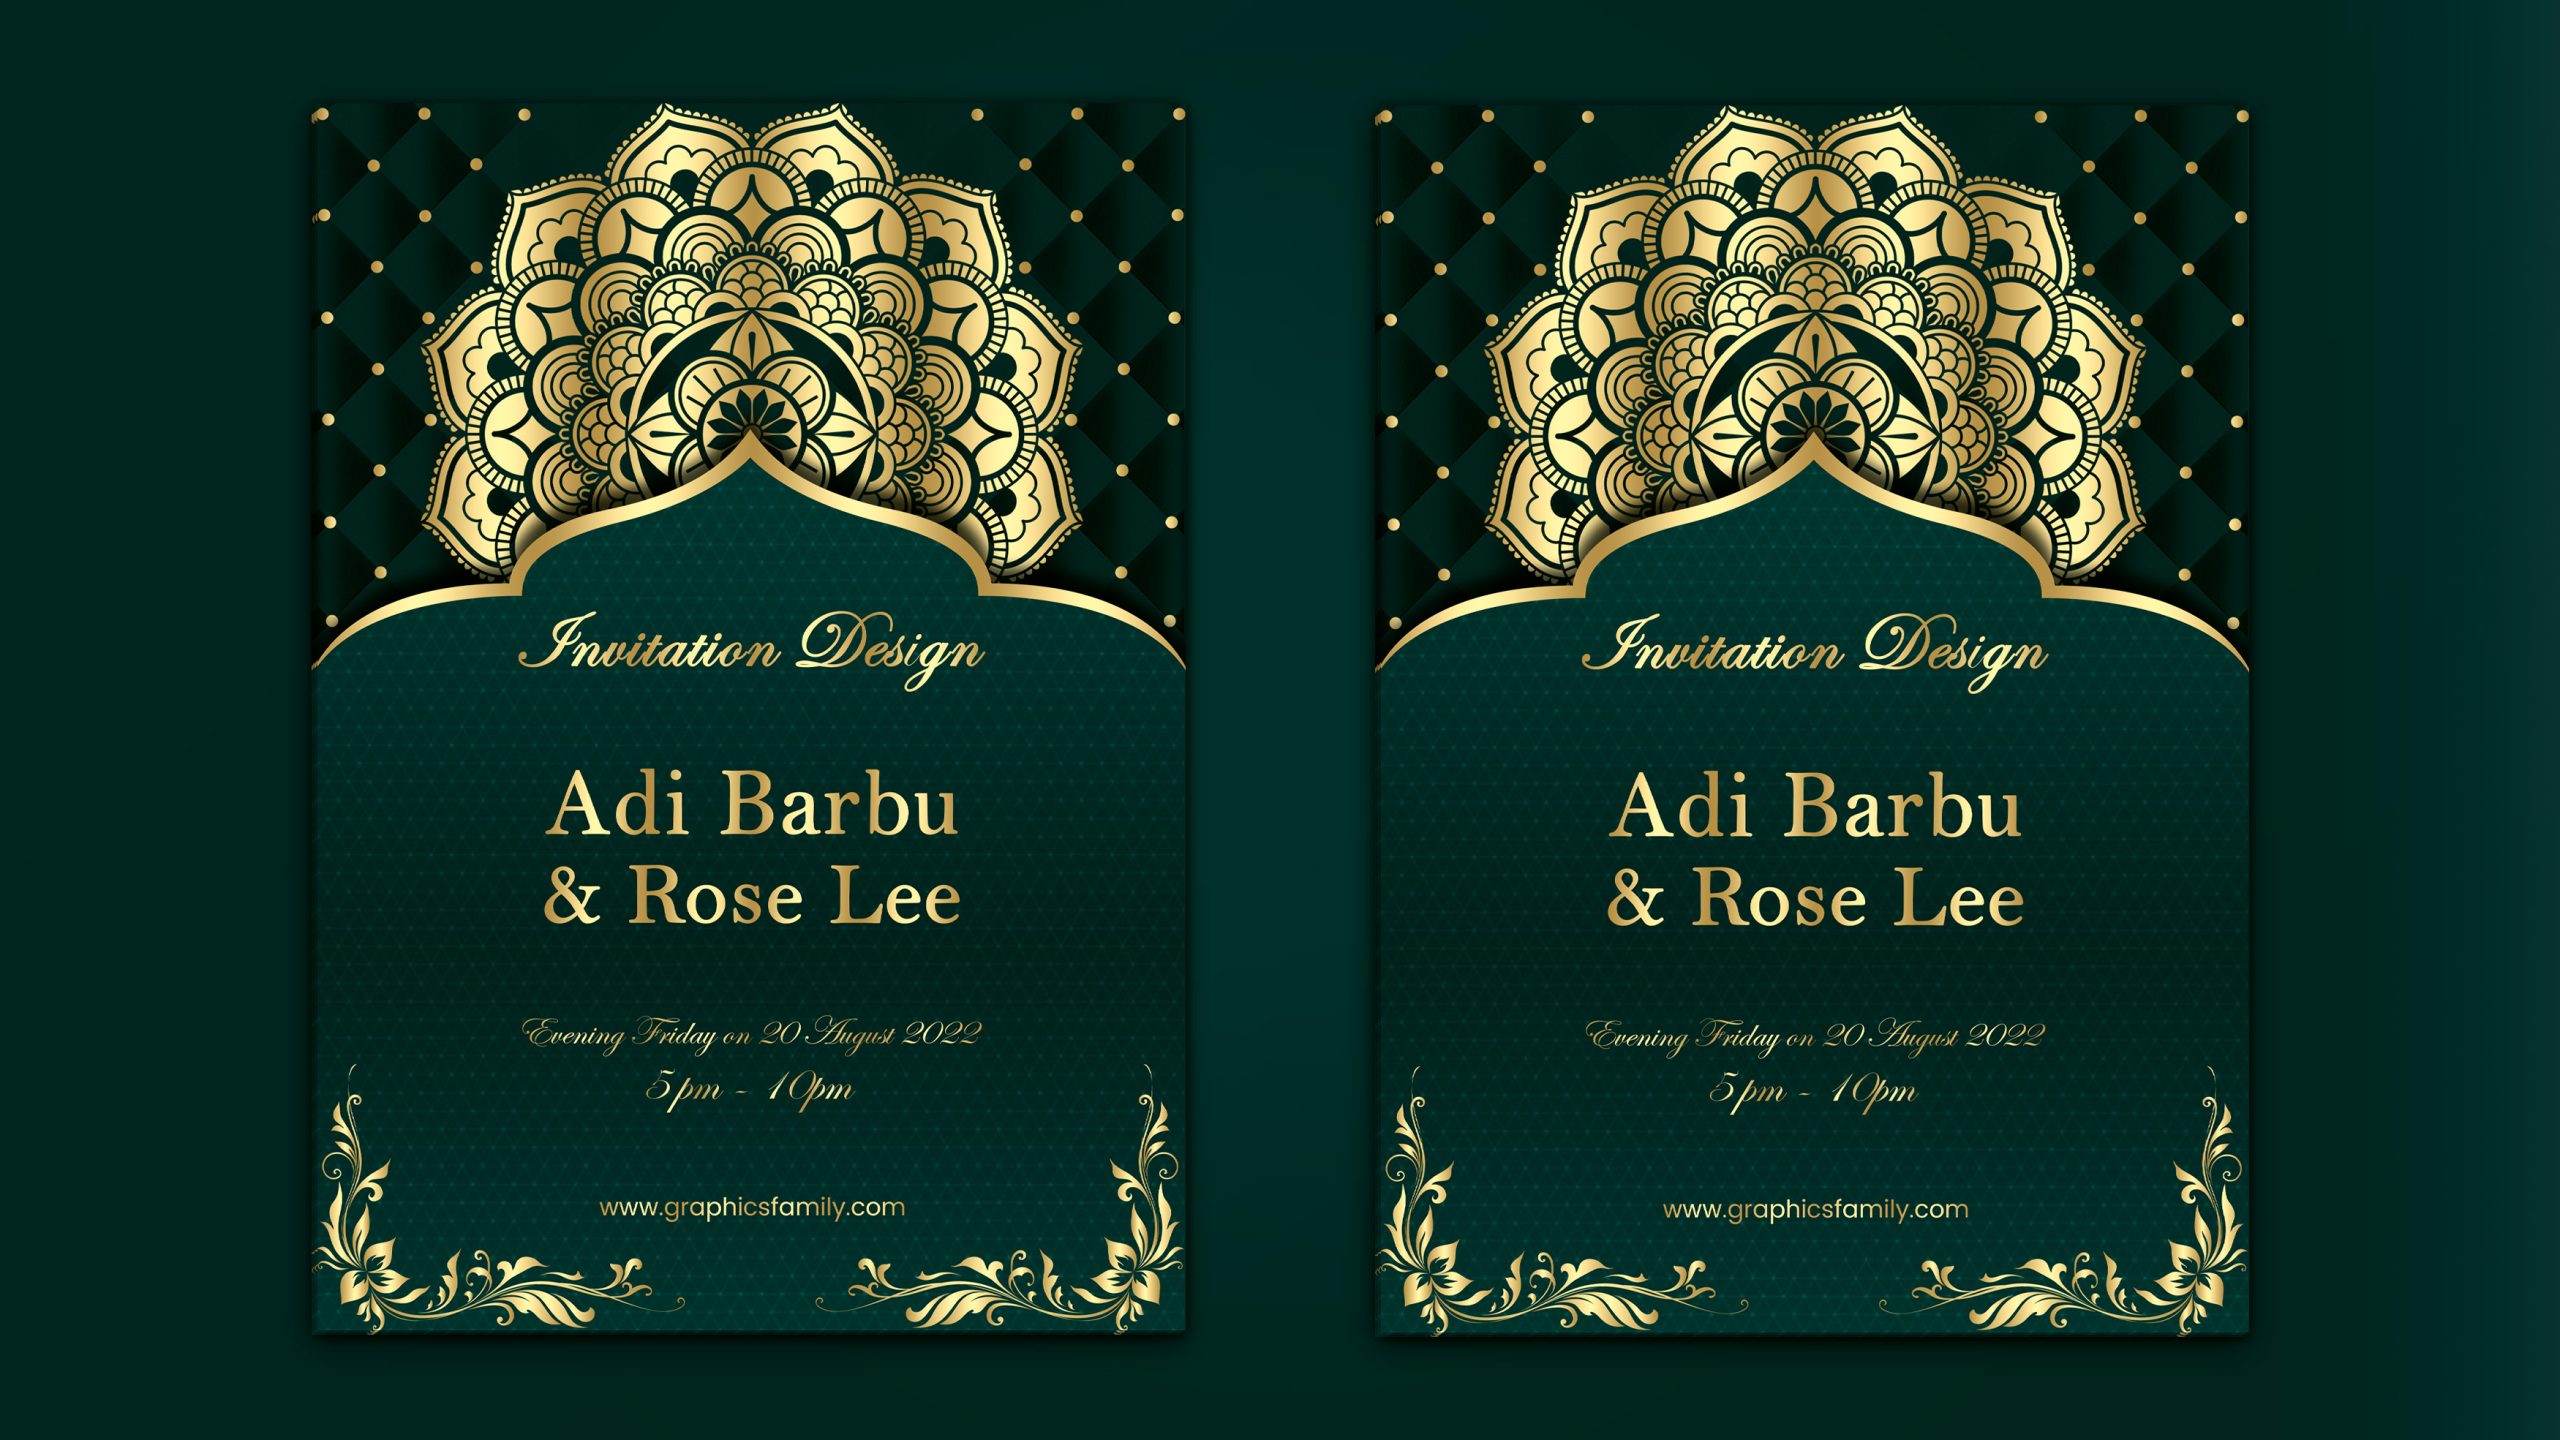 Free Wedding Invitation Card Design with Green and Gold Colors –  GraphicsFamily